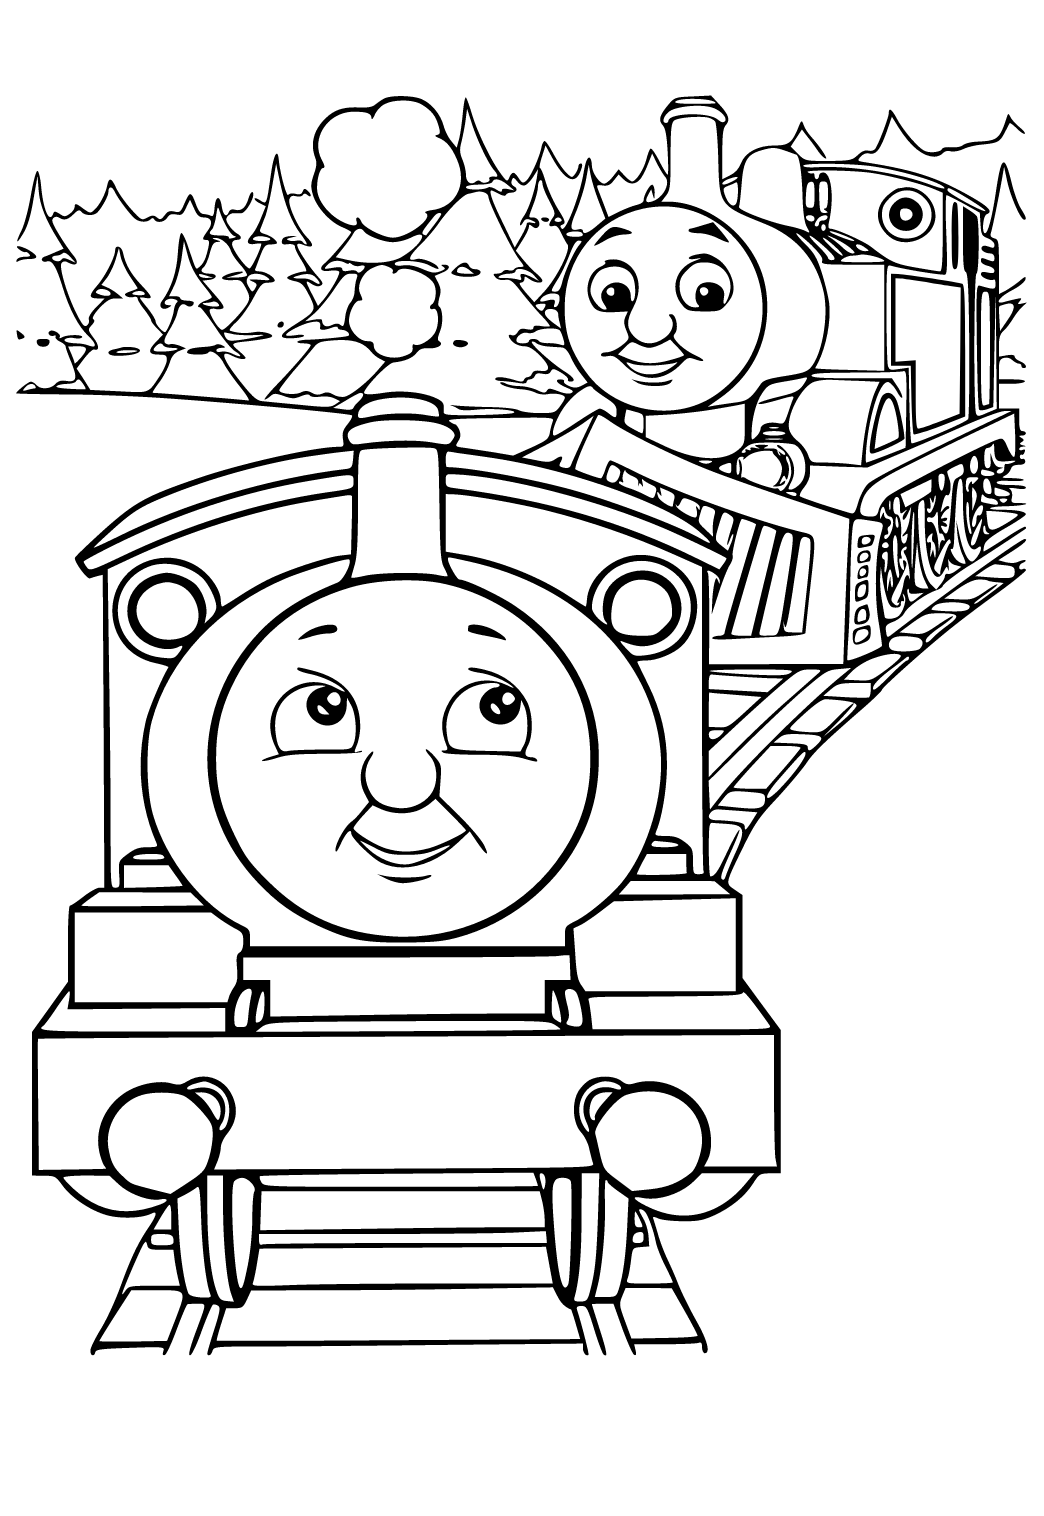 Free printable thomas the train friends coloring page for adults and kids